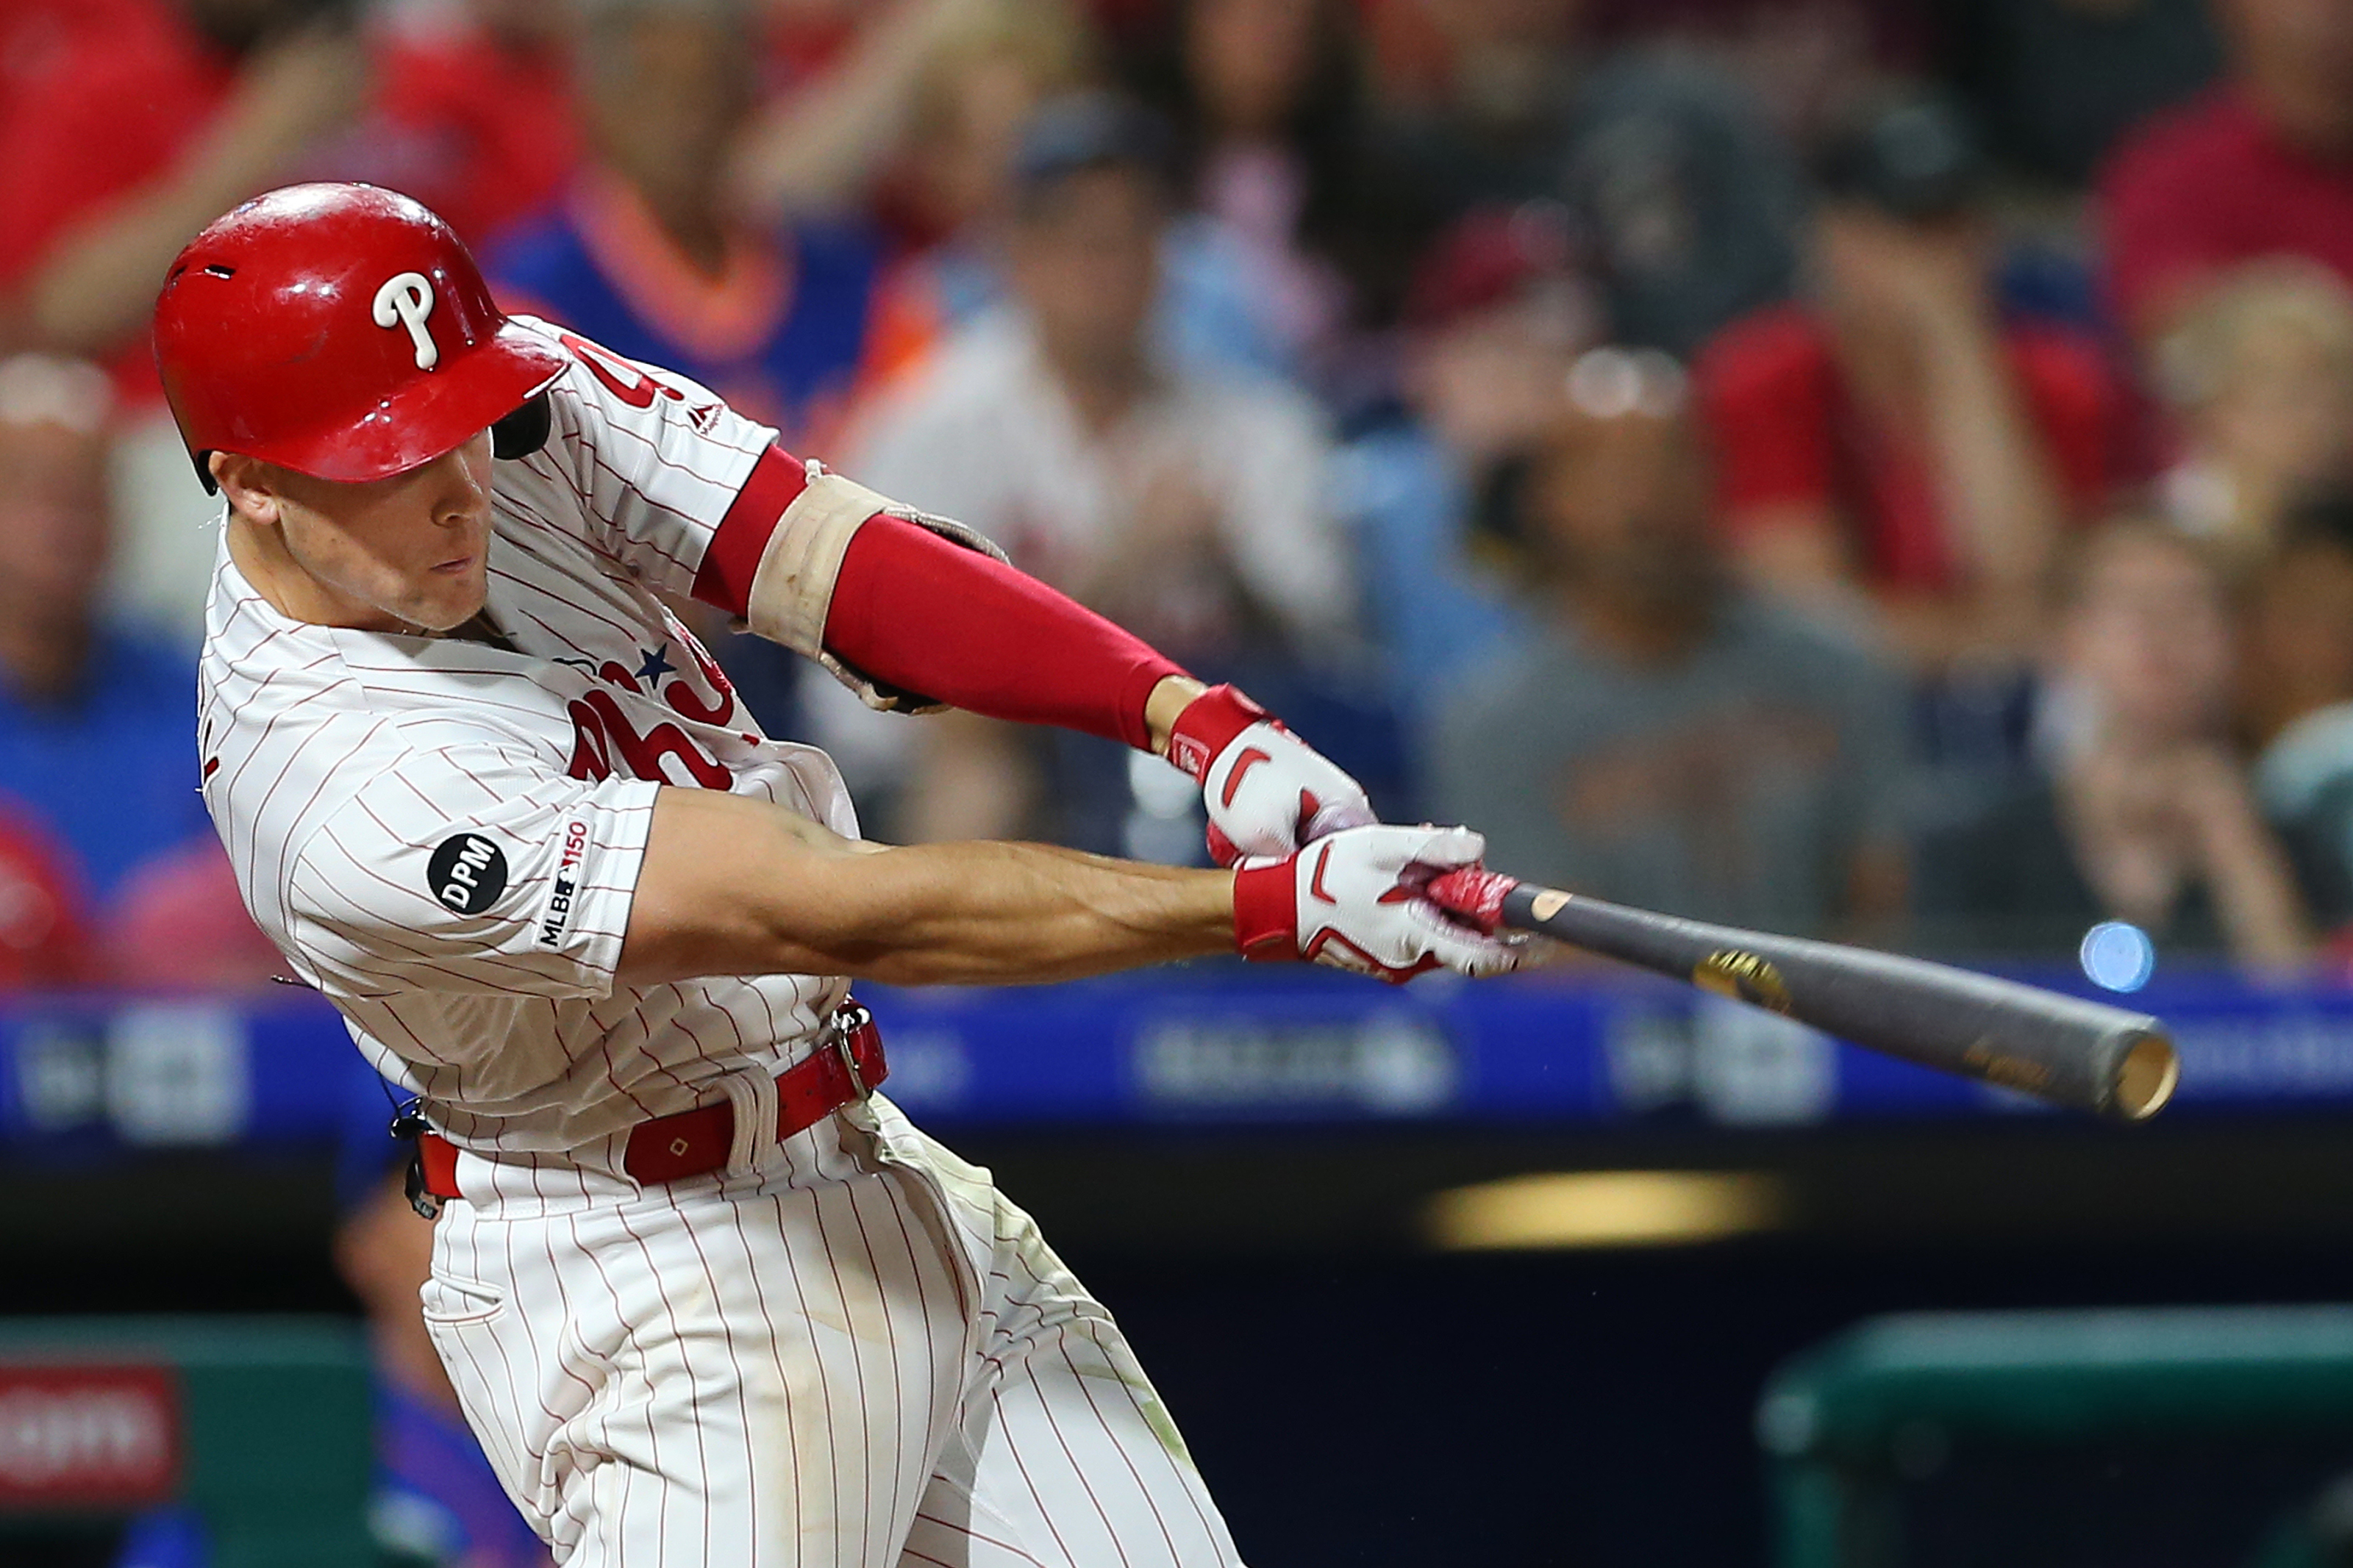 Phillies' Scott Kingery shows off results of his 'different swing